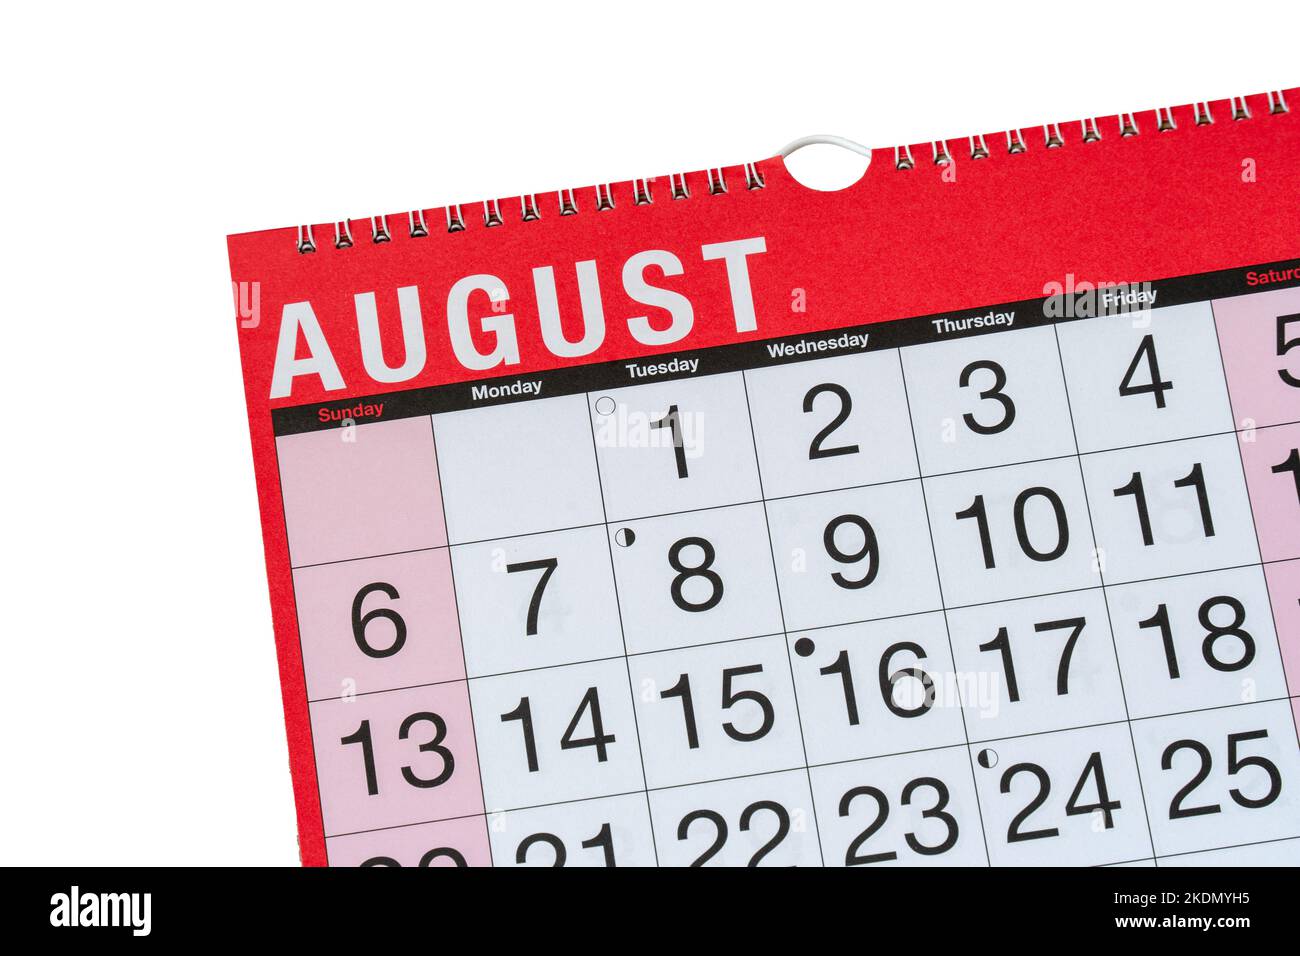 Calendar concept, month and dates with August selected Stock Photo